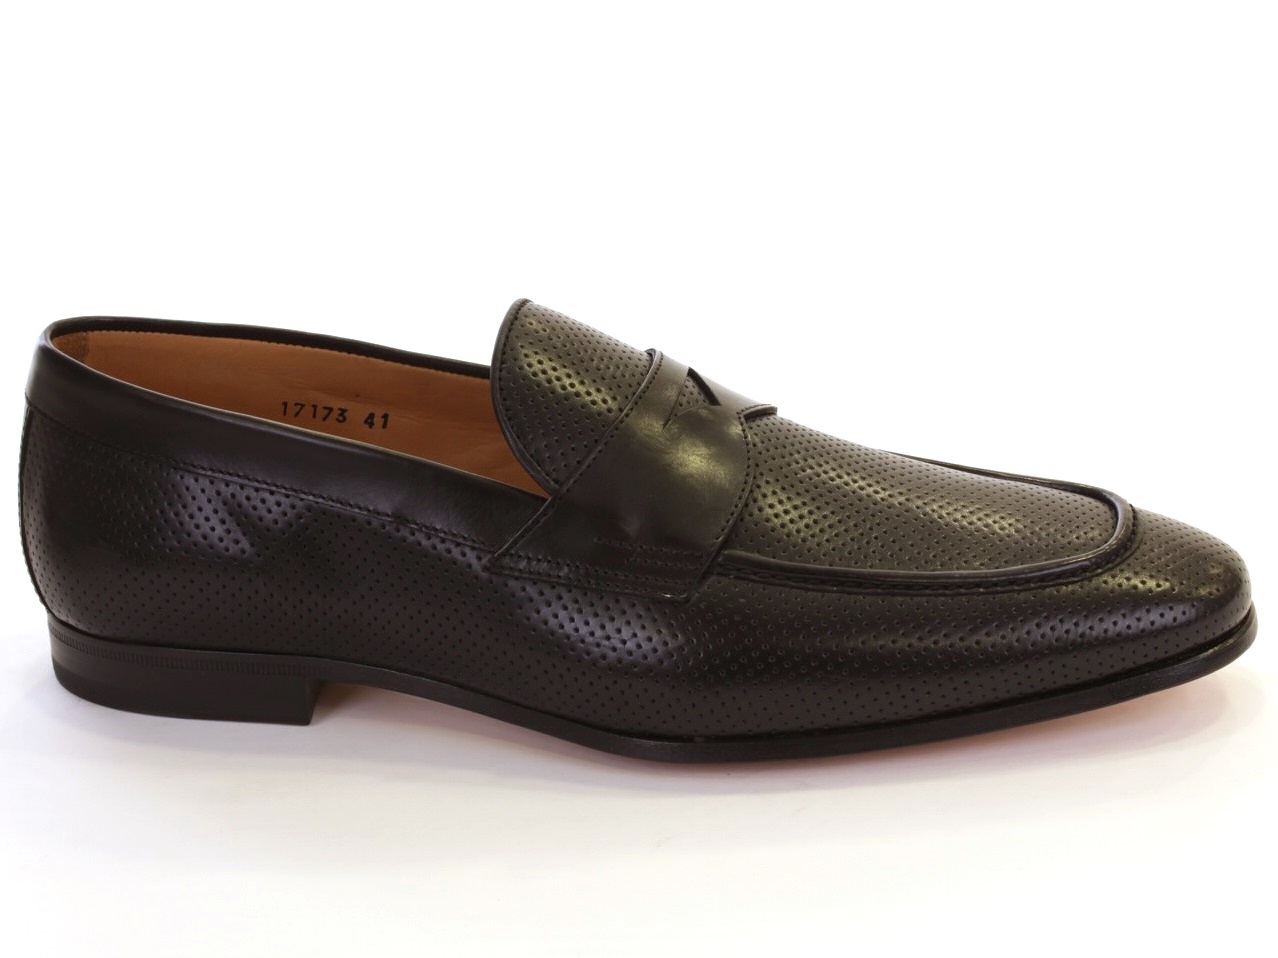 Loafers Shoes Gino Bianchi - 405 17173 | Glispe Store